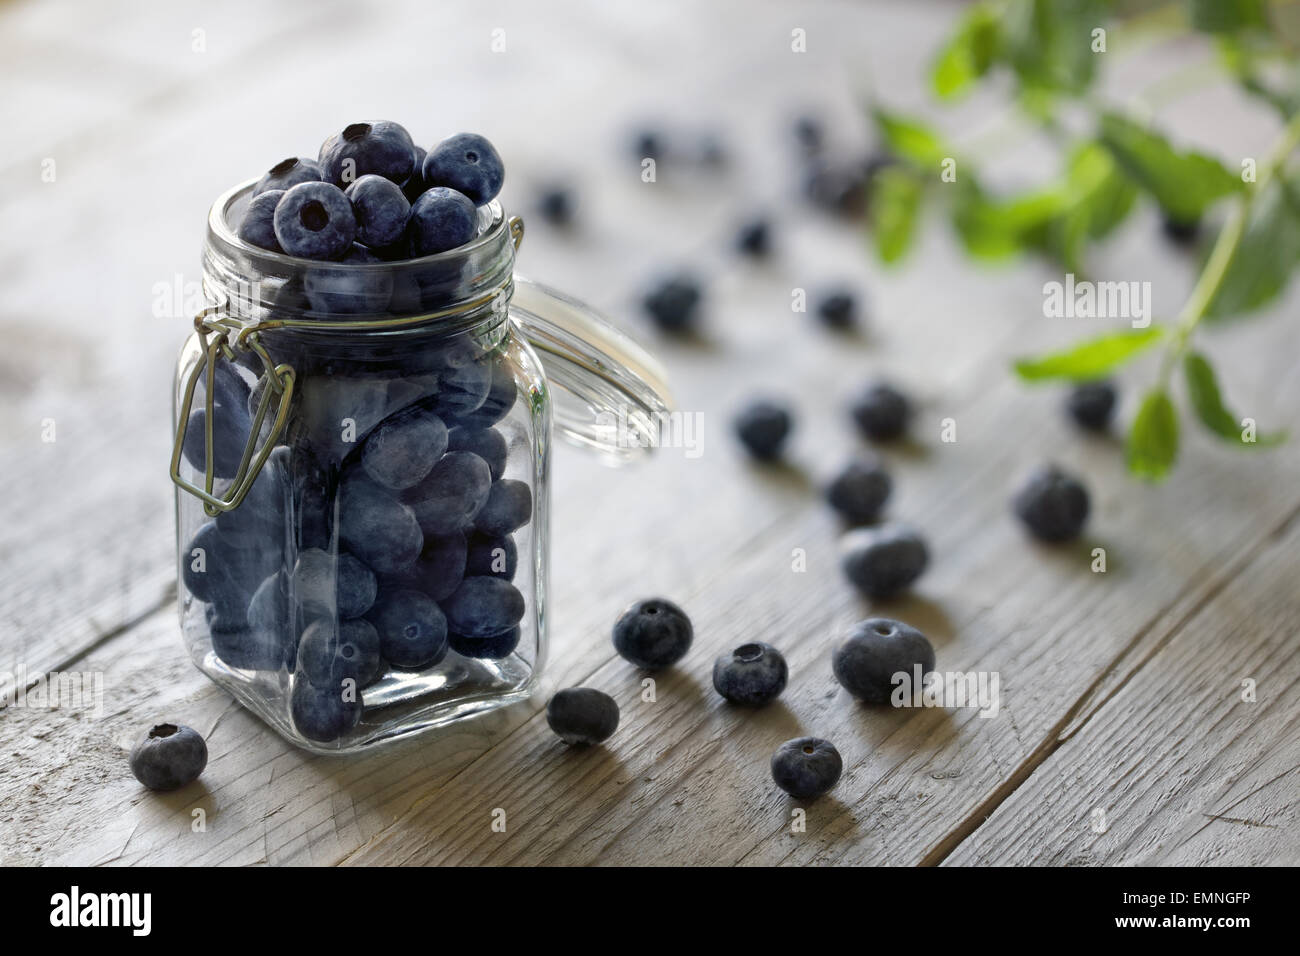 Blueberry antioxidant organic superfood in a jar concept for healthy eating and nutrition Stock Photo